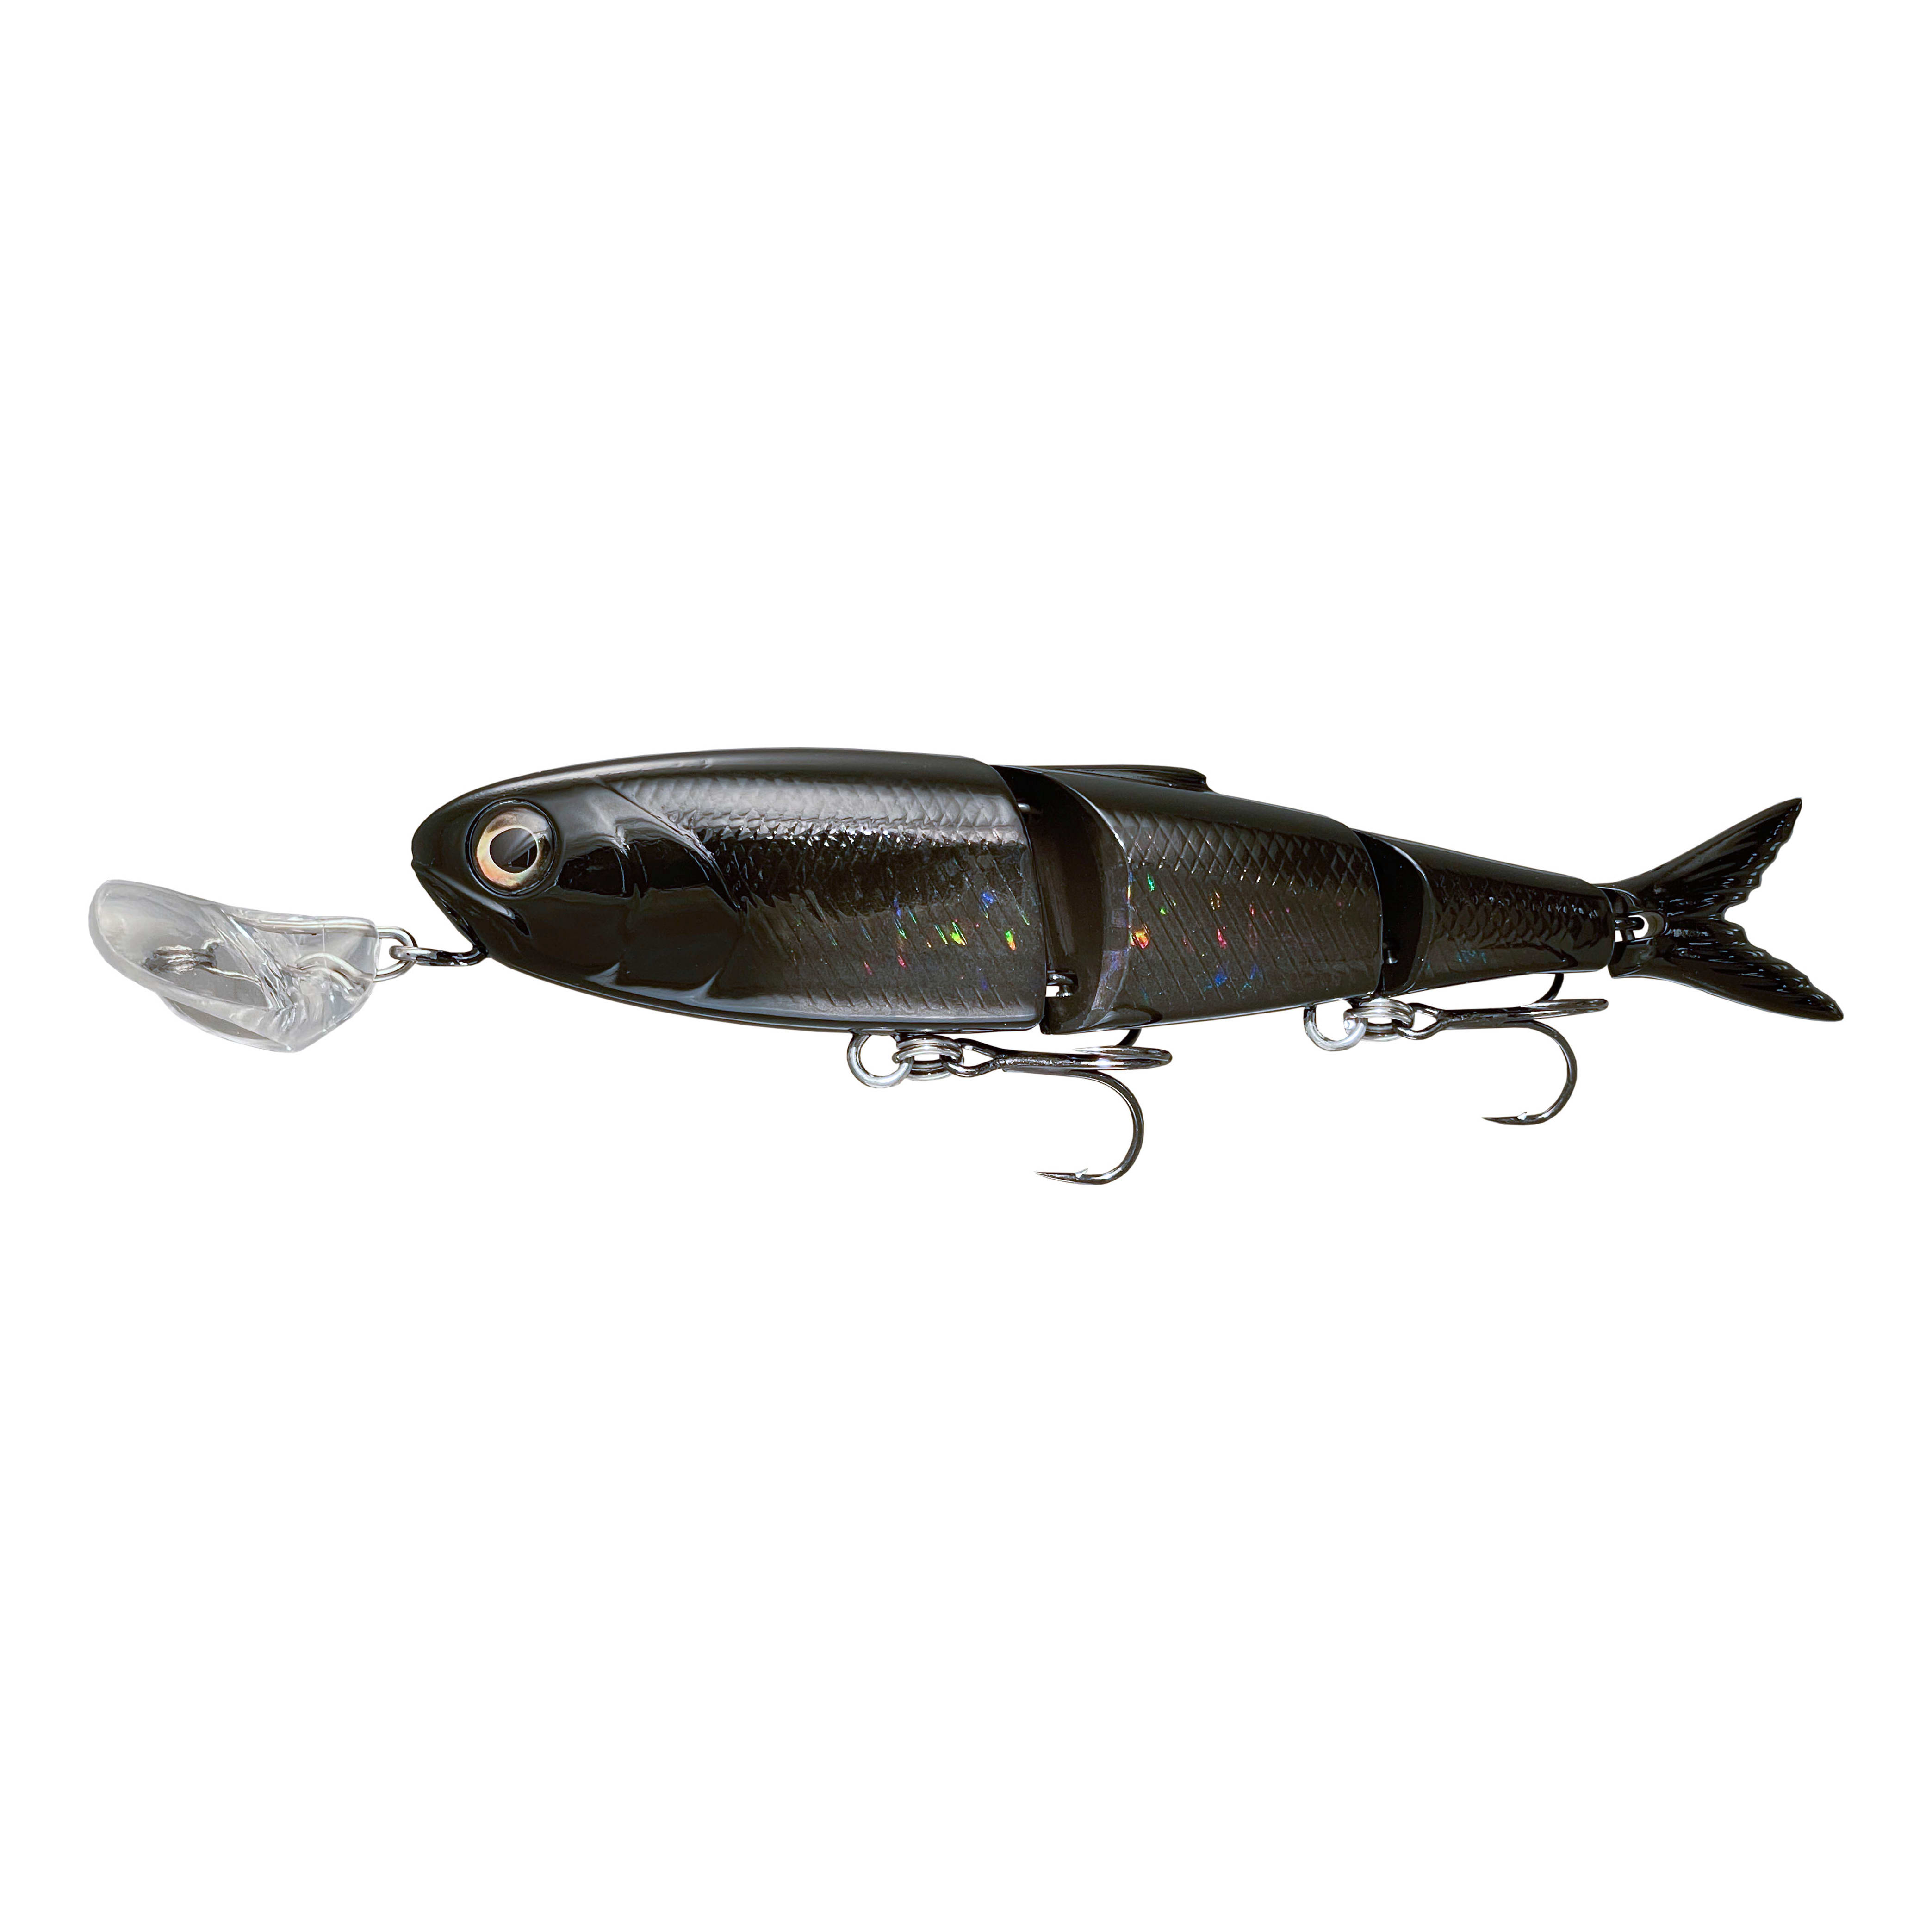 Johnson Beetle Spin Willow Blade R Bait, White, 1/8-Ounce, Baits